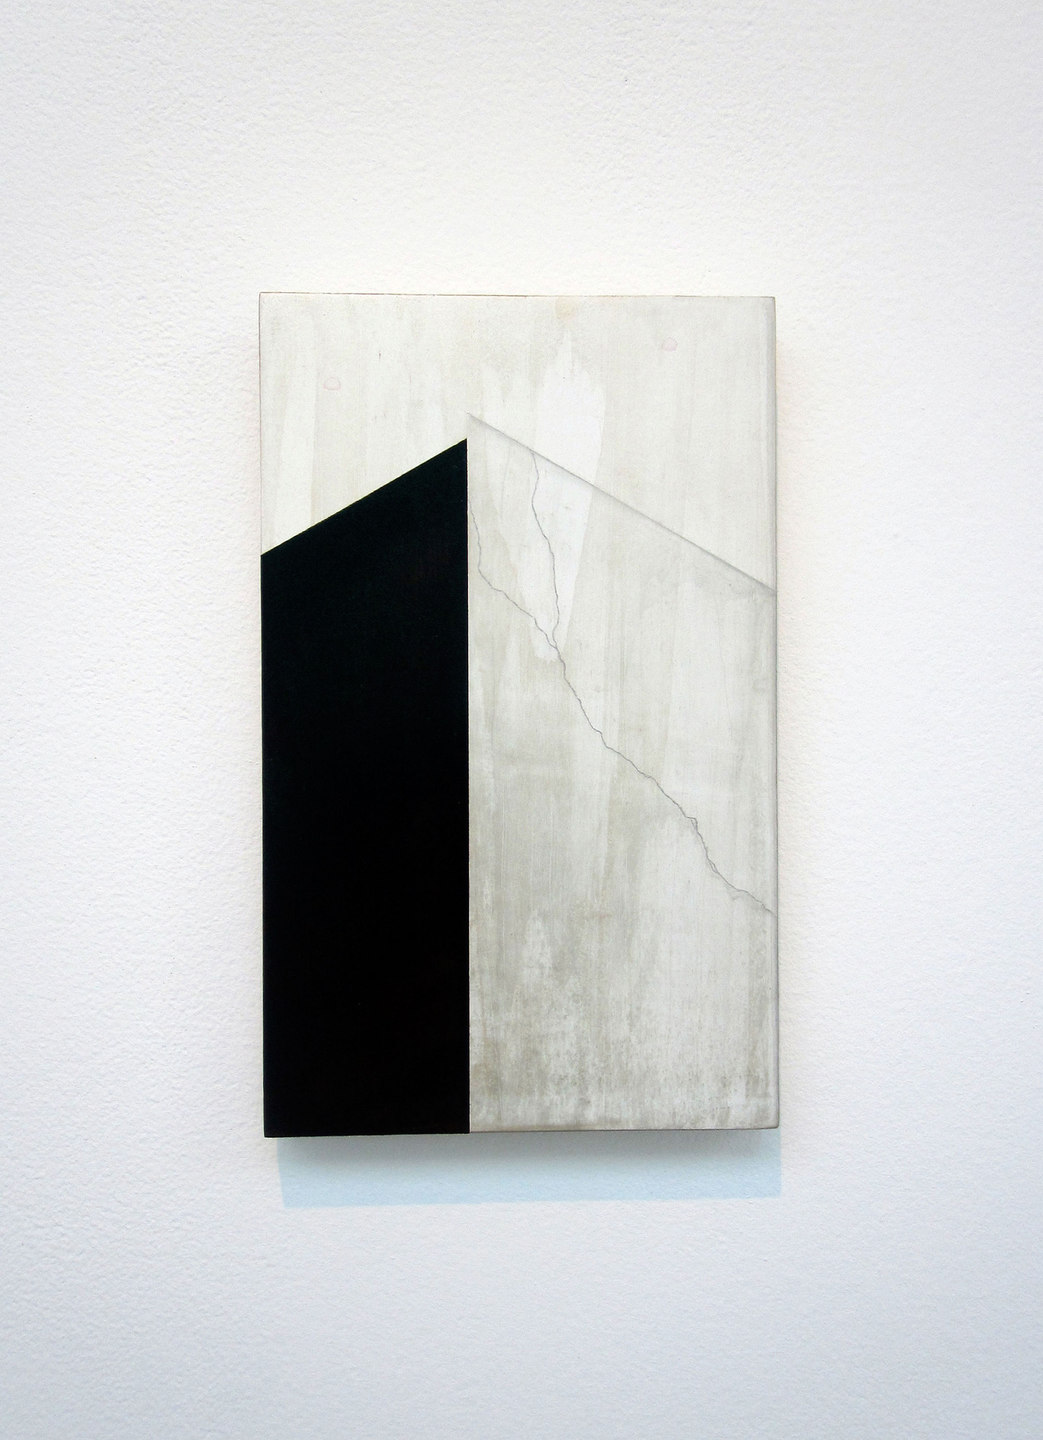 Andy Jackson, Junction (Infinity), 2010, Acrylic and Metallic Acrylic on Board, (h.800mm x w.500mm), Cell Project Space